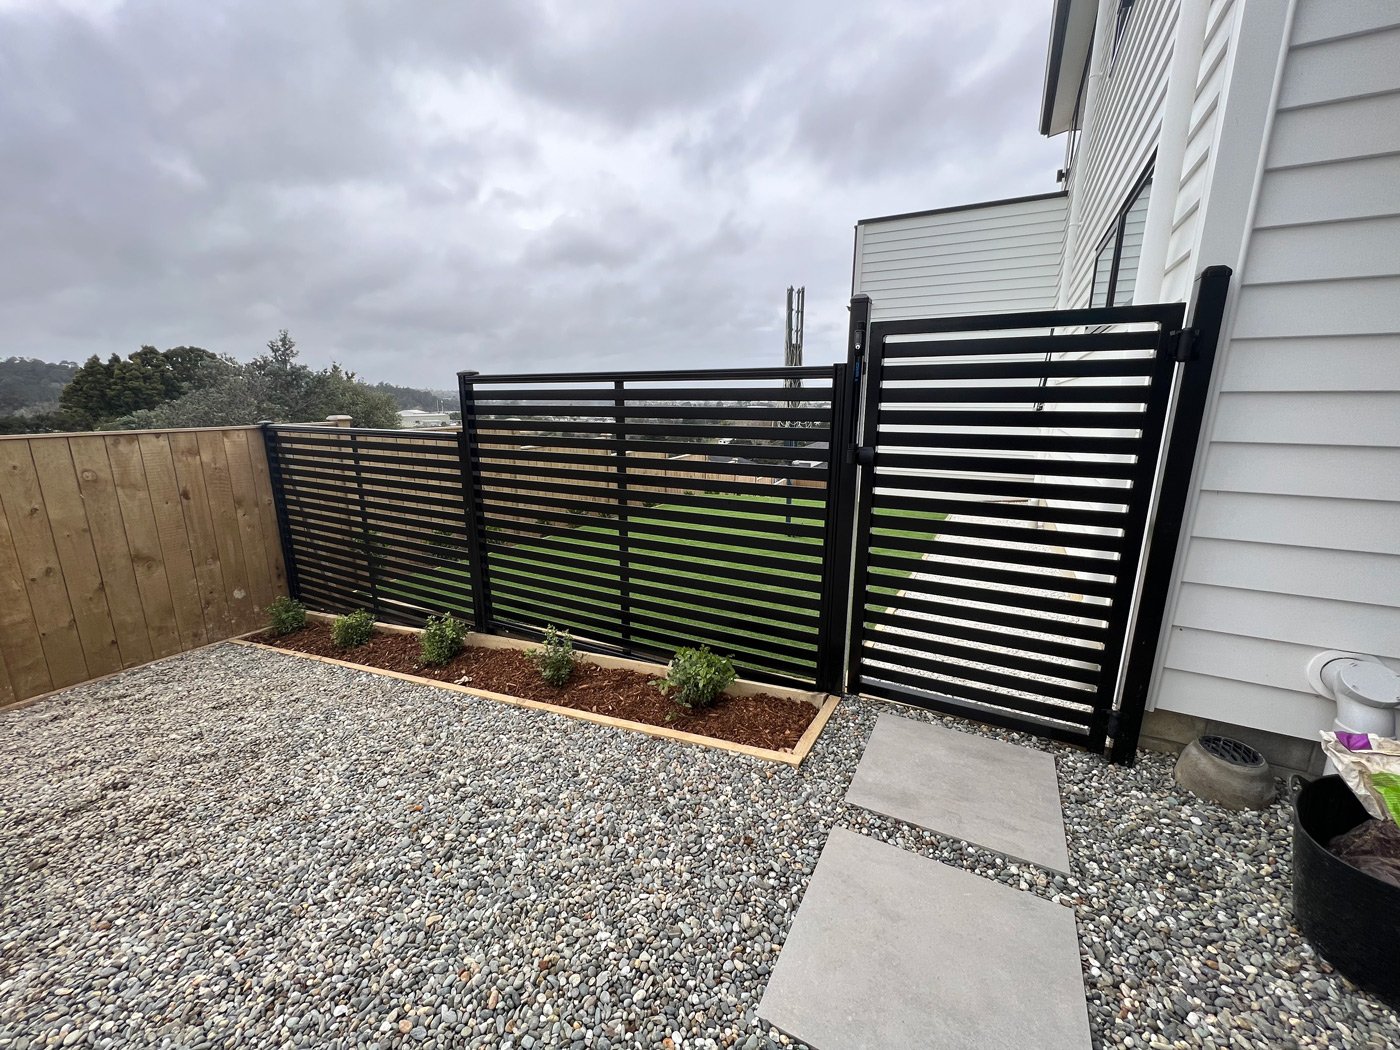 Modern black fence and gate that divide the yard from a pebble area with white stone tiles to walk on